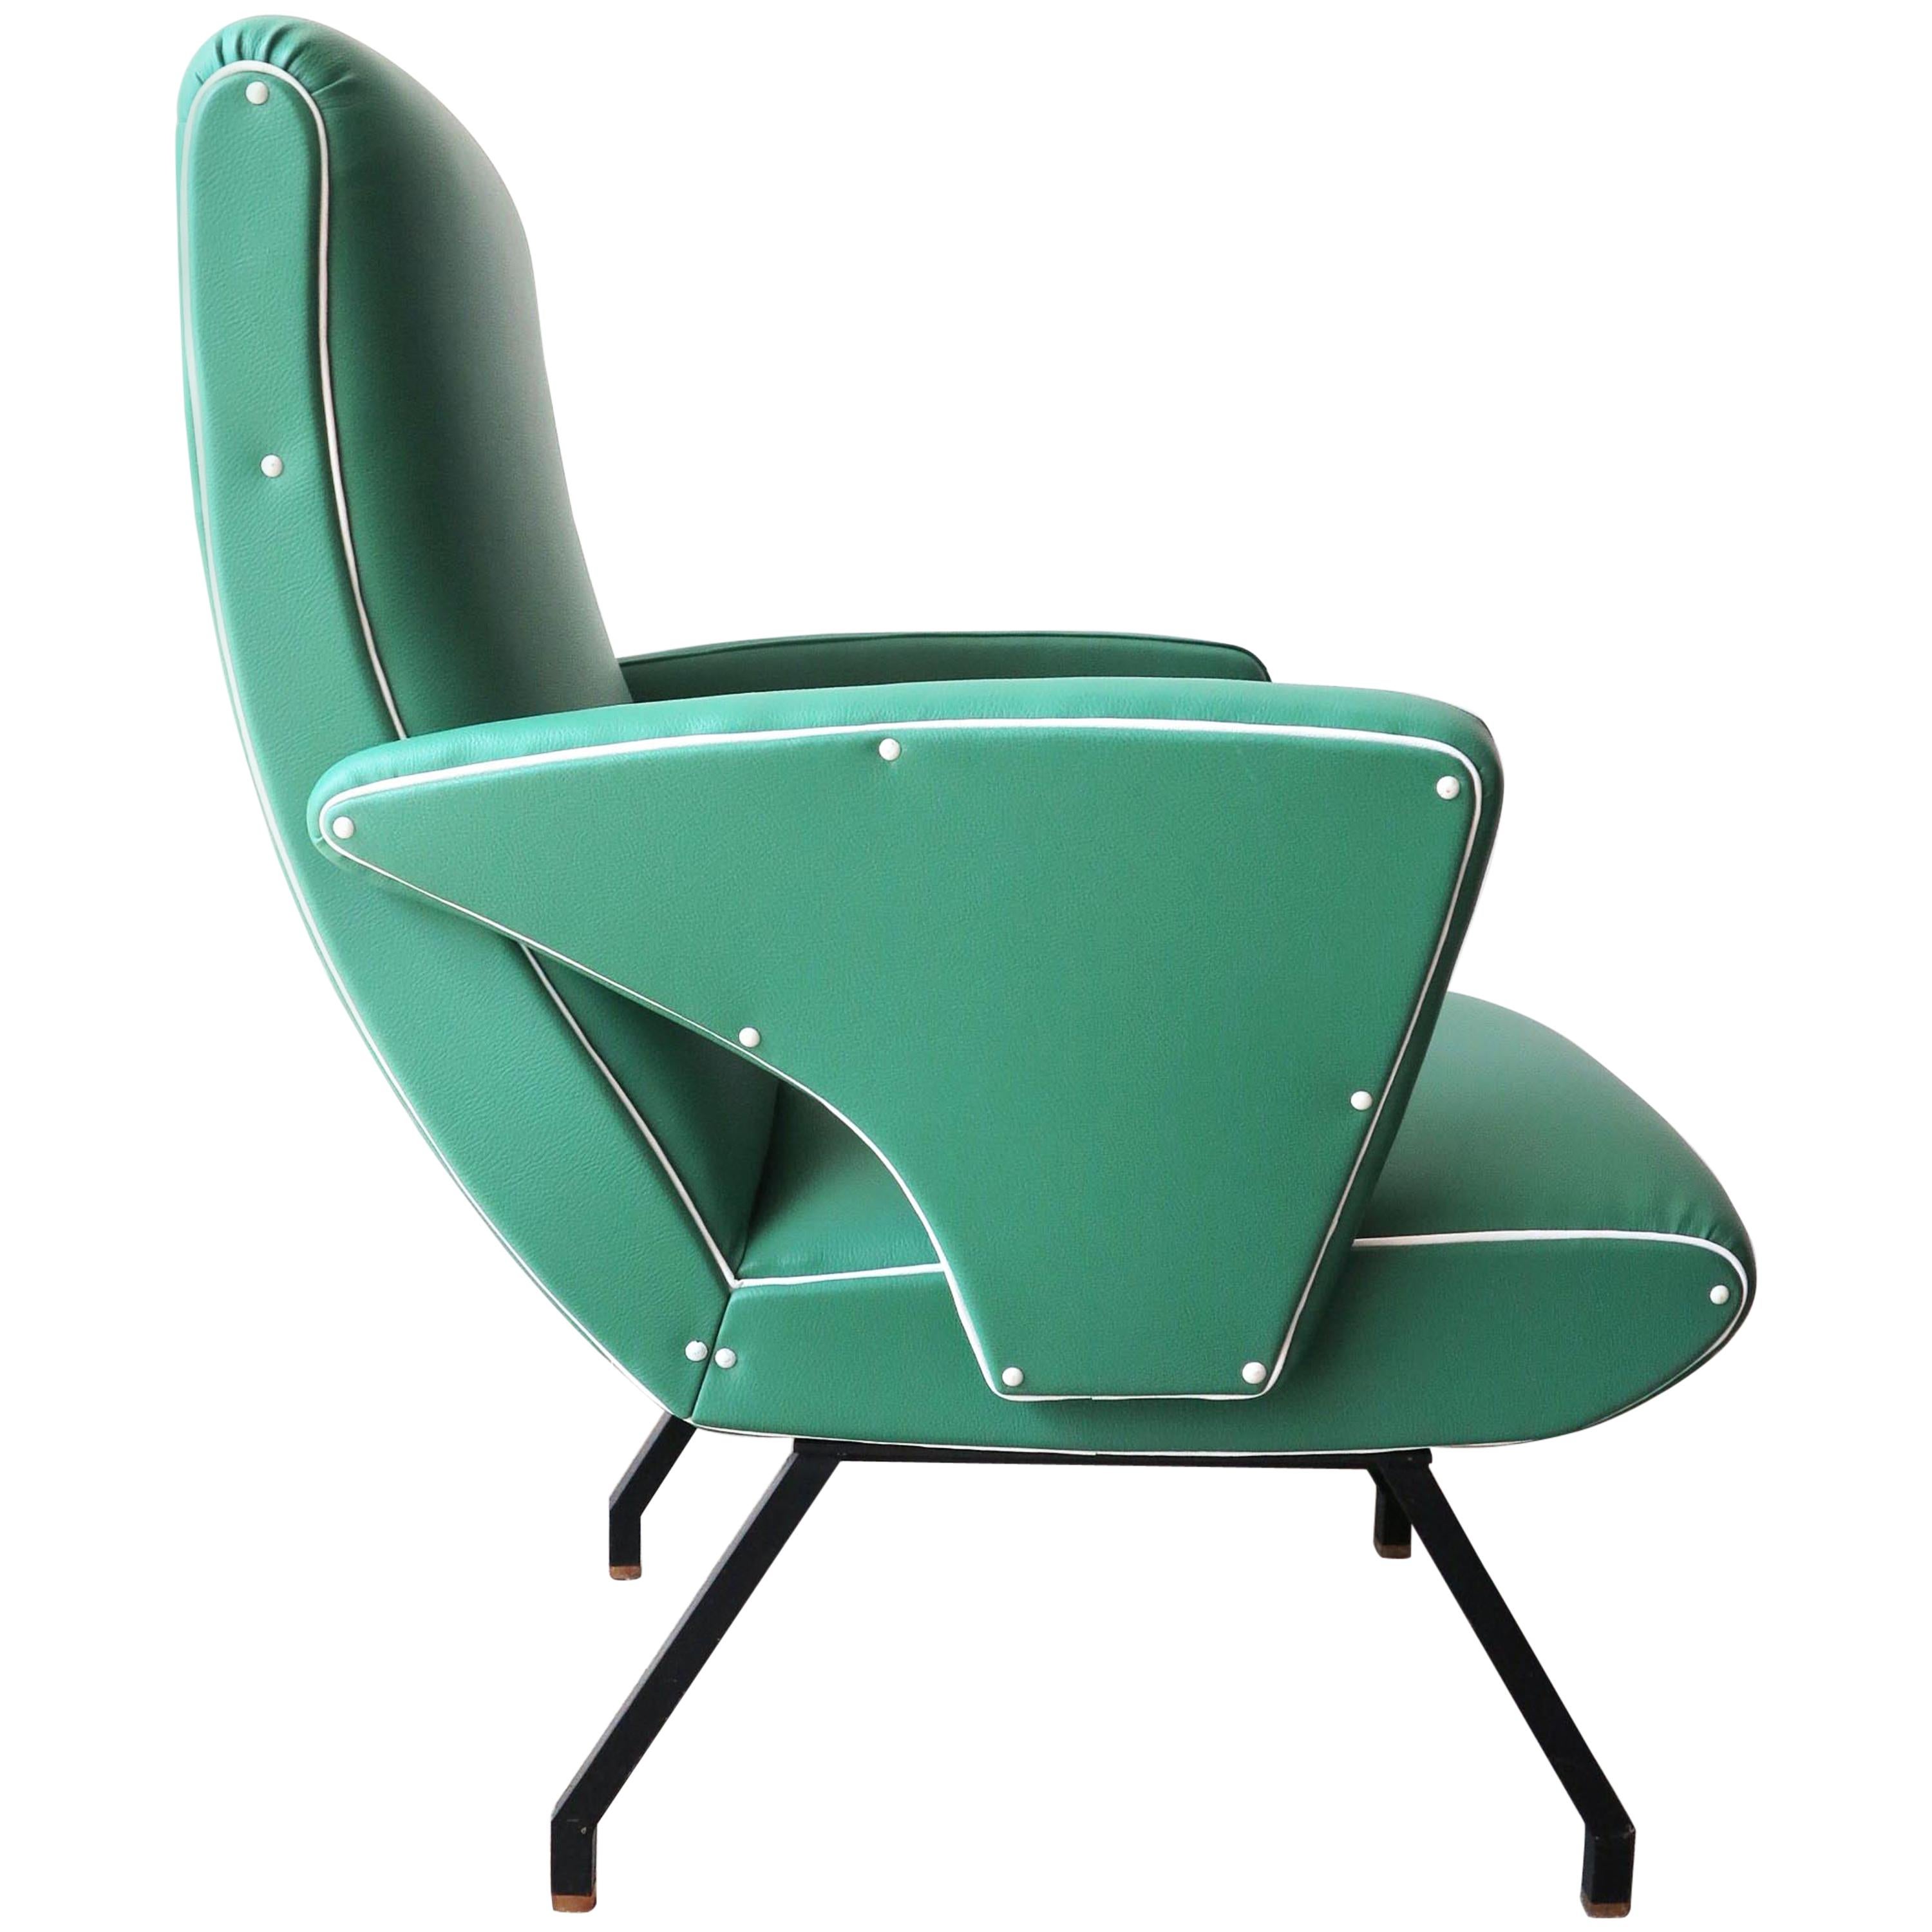 Midcentury Green Italian Armchair in the Style of "Lady Armchair", Marco Zanuso im Angebot